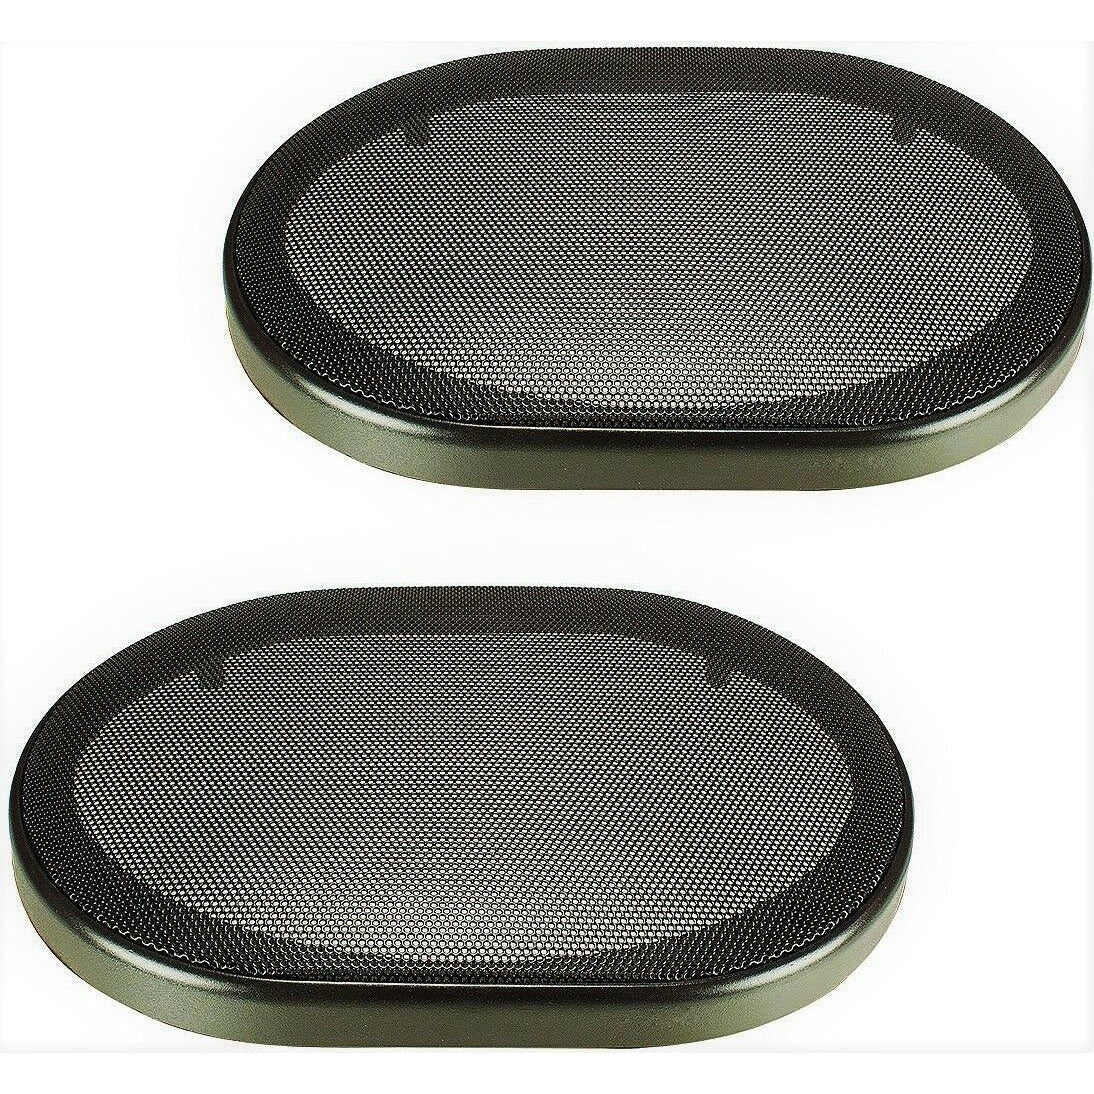 (2) MK AUDIO Universal 6"x9" Speaker COAXIAL Component Protective Grills Covers